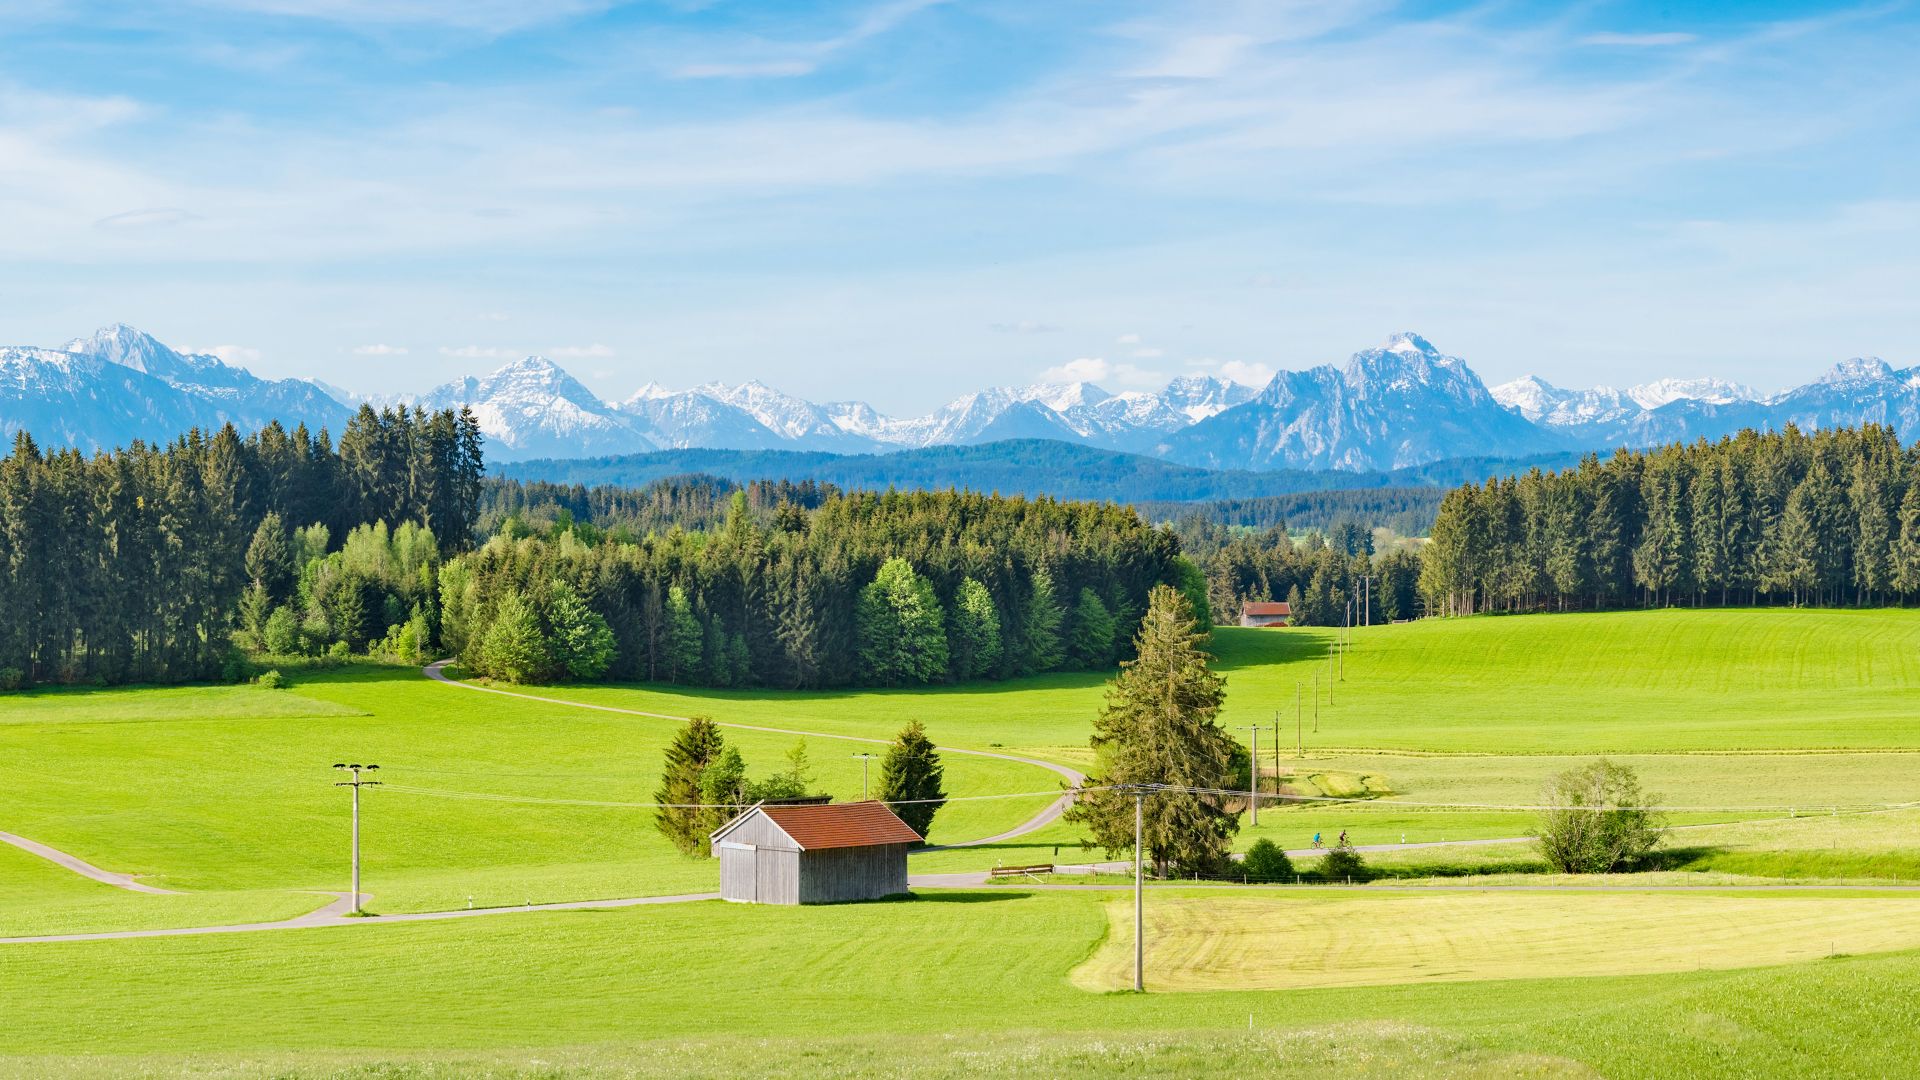 Allgäu, red roofed farm buildings on a vast green landscape  of fields and forest with a dramatic backdrop of snow capped mountains on the horizon